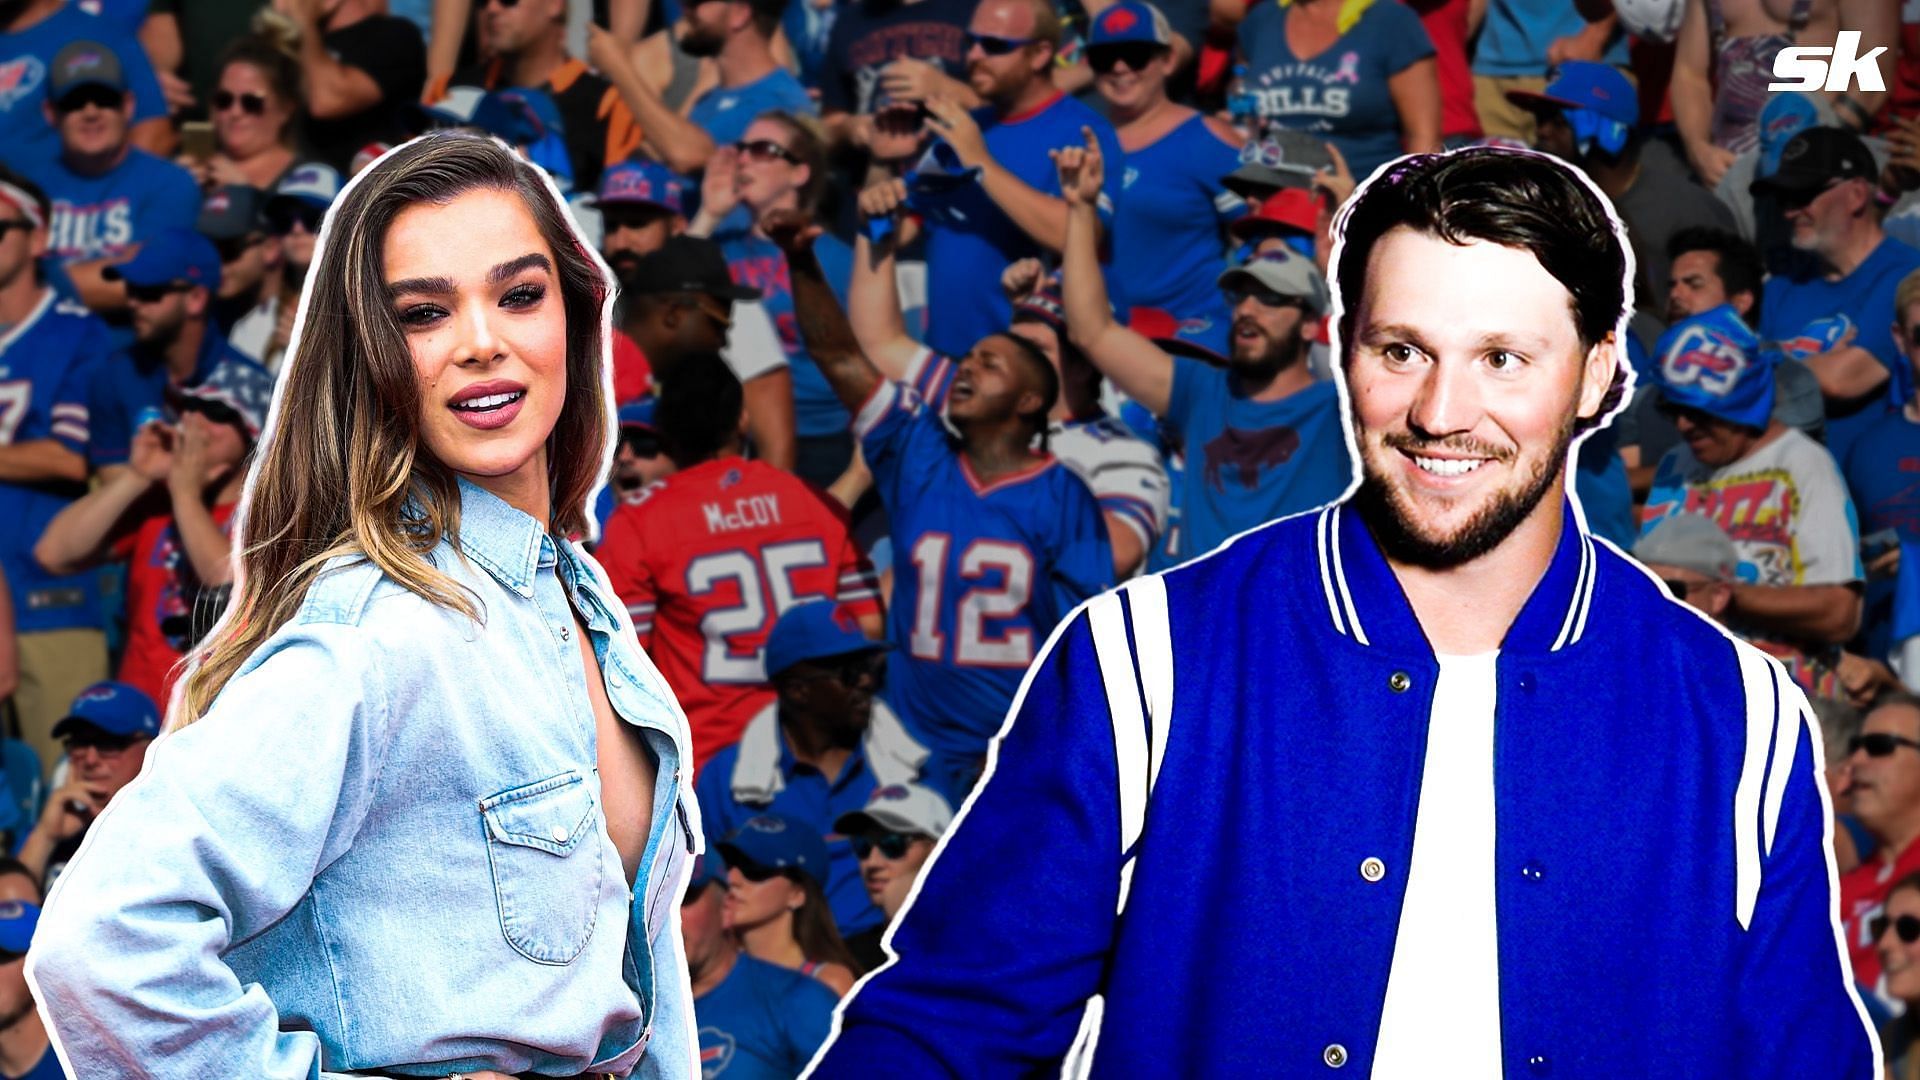 TikToker claims to have 'leaked' details on Josh Allen and Hailee Steinfeld  – “Exactly what Bills Mafia wants”